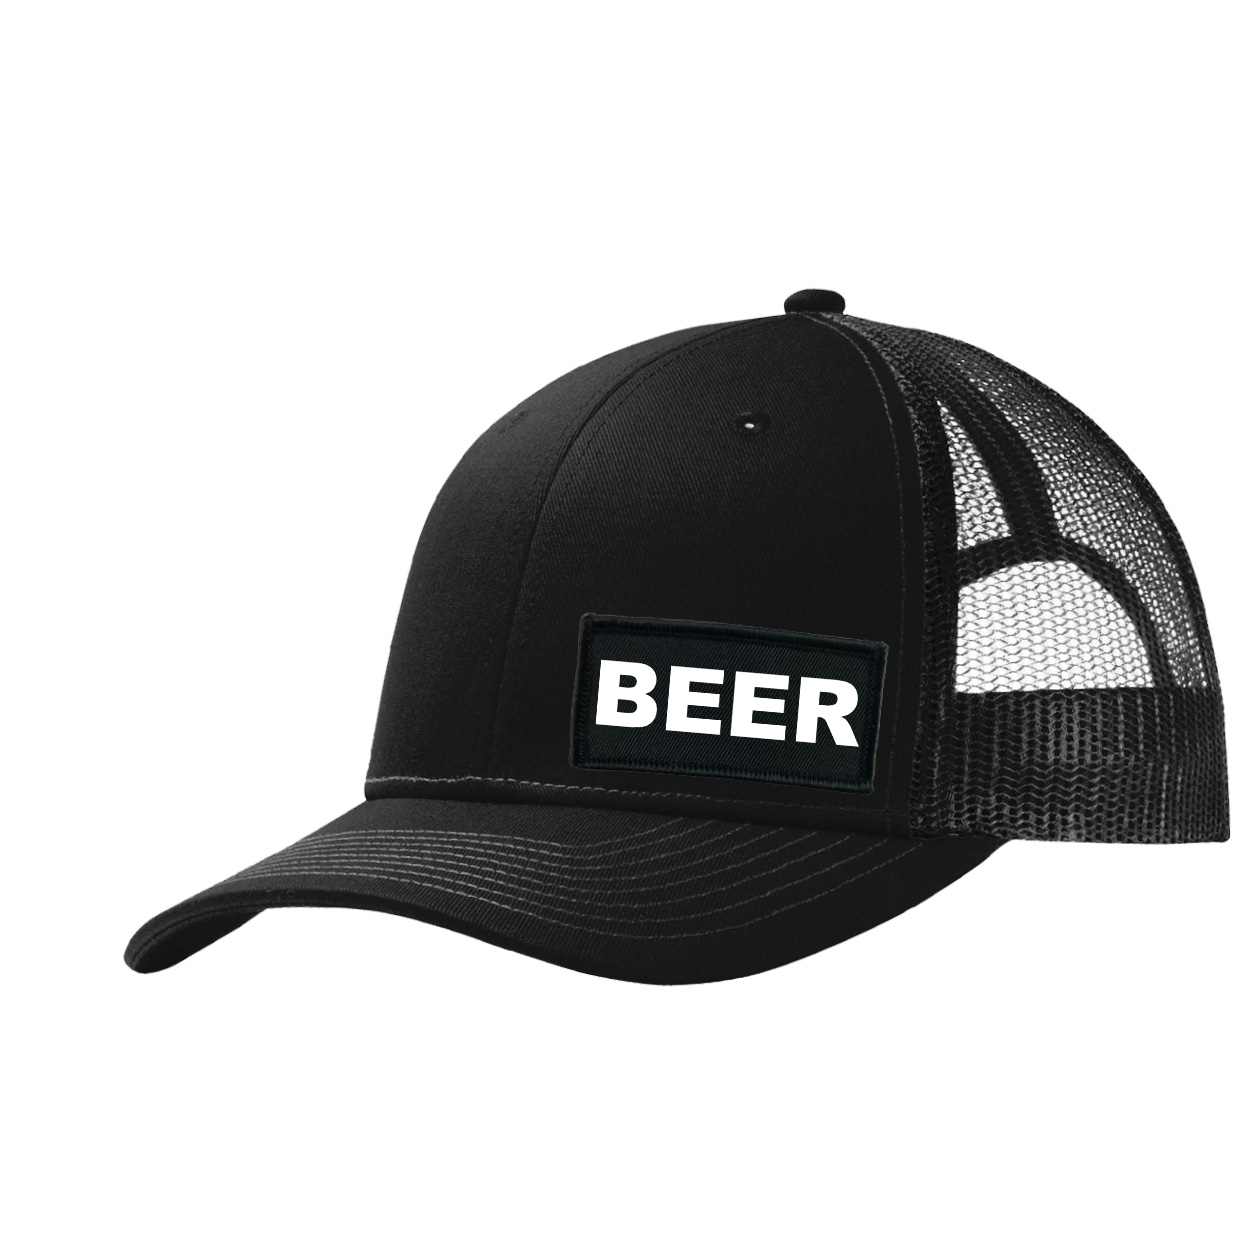 Beer Brand Logo Night Out Woven Patch Snapback Trucker Hat Black (White Logo)